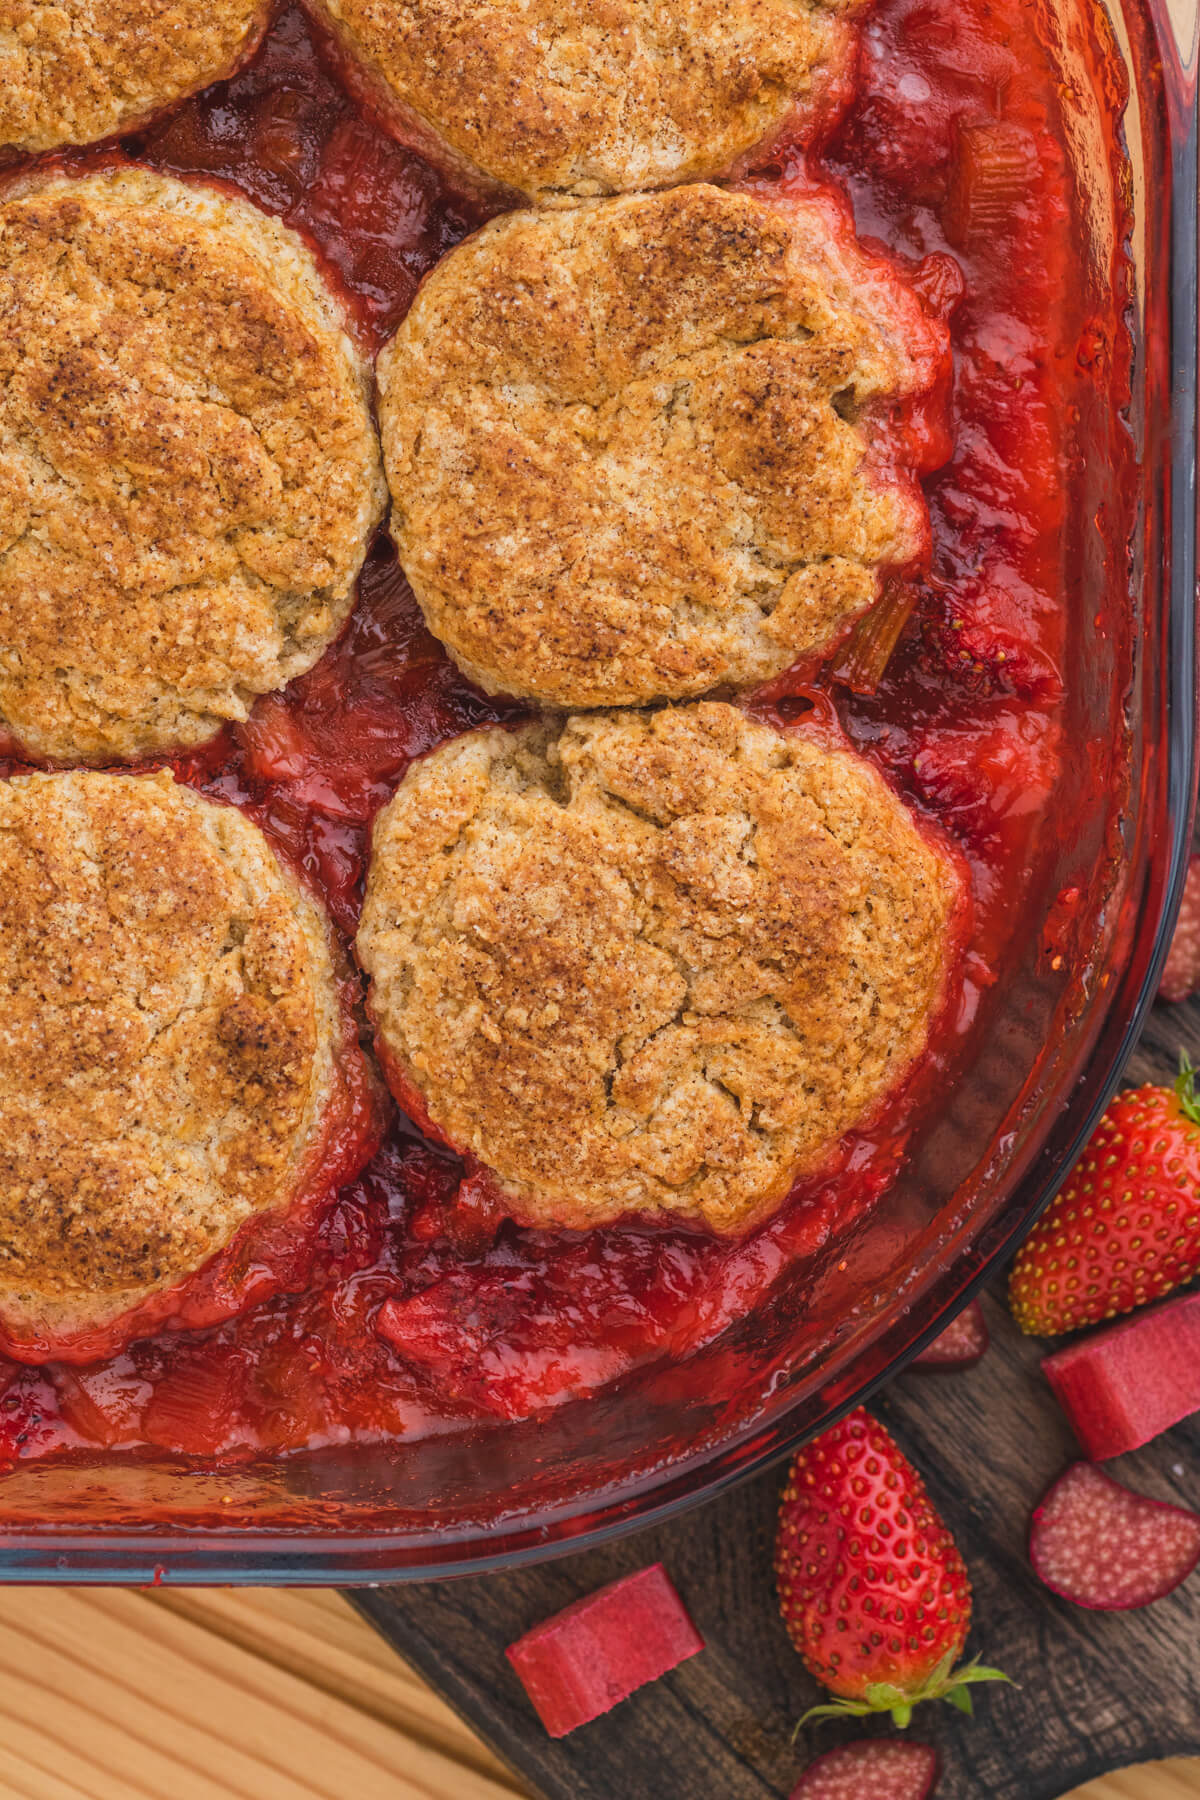 Golden baked biscuit cobbles on top of strawberry rhubarb cobbler.
